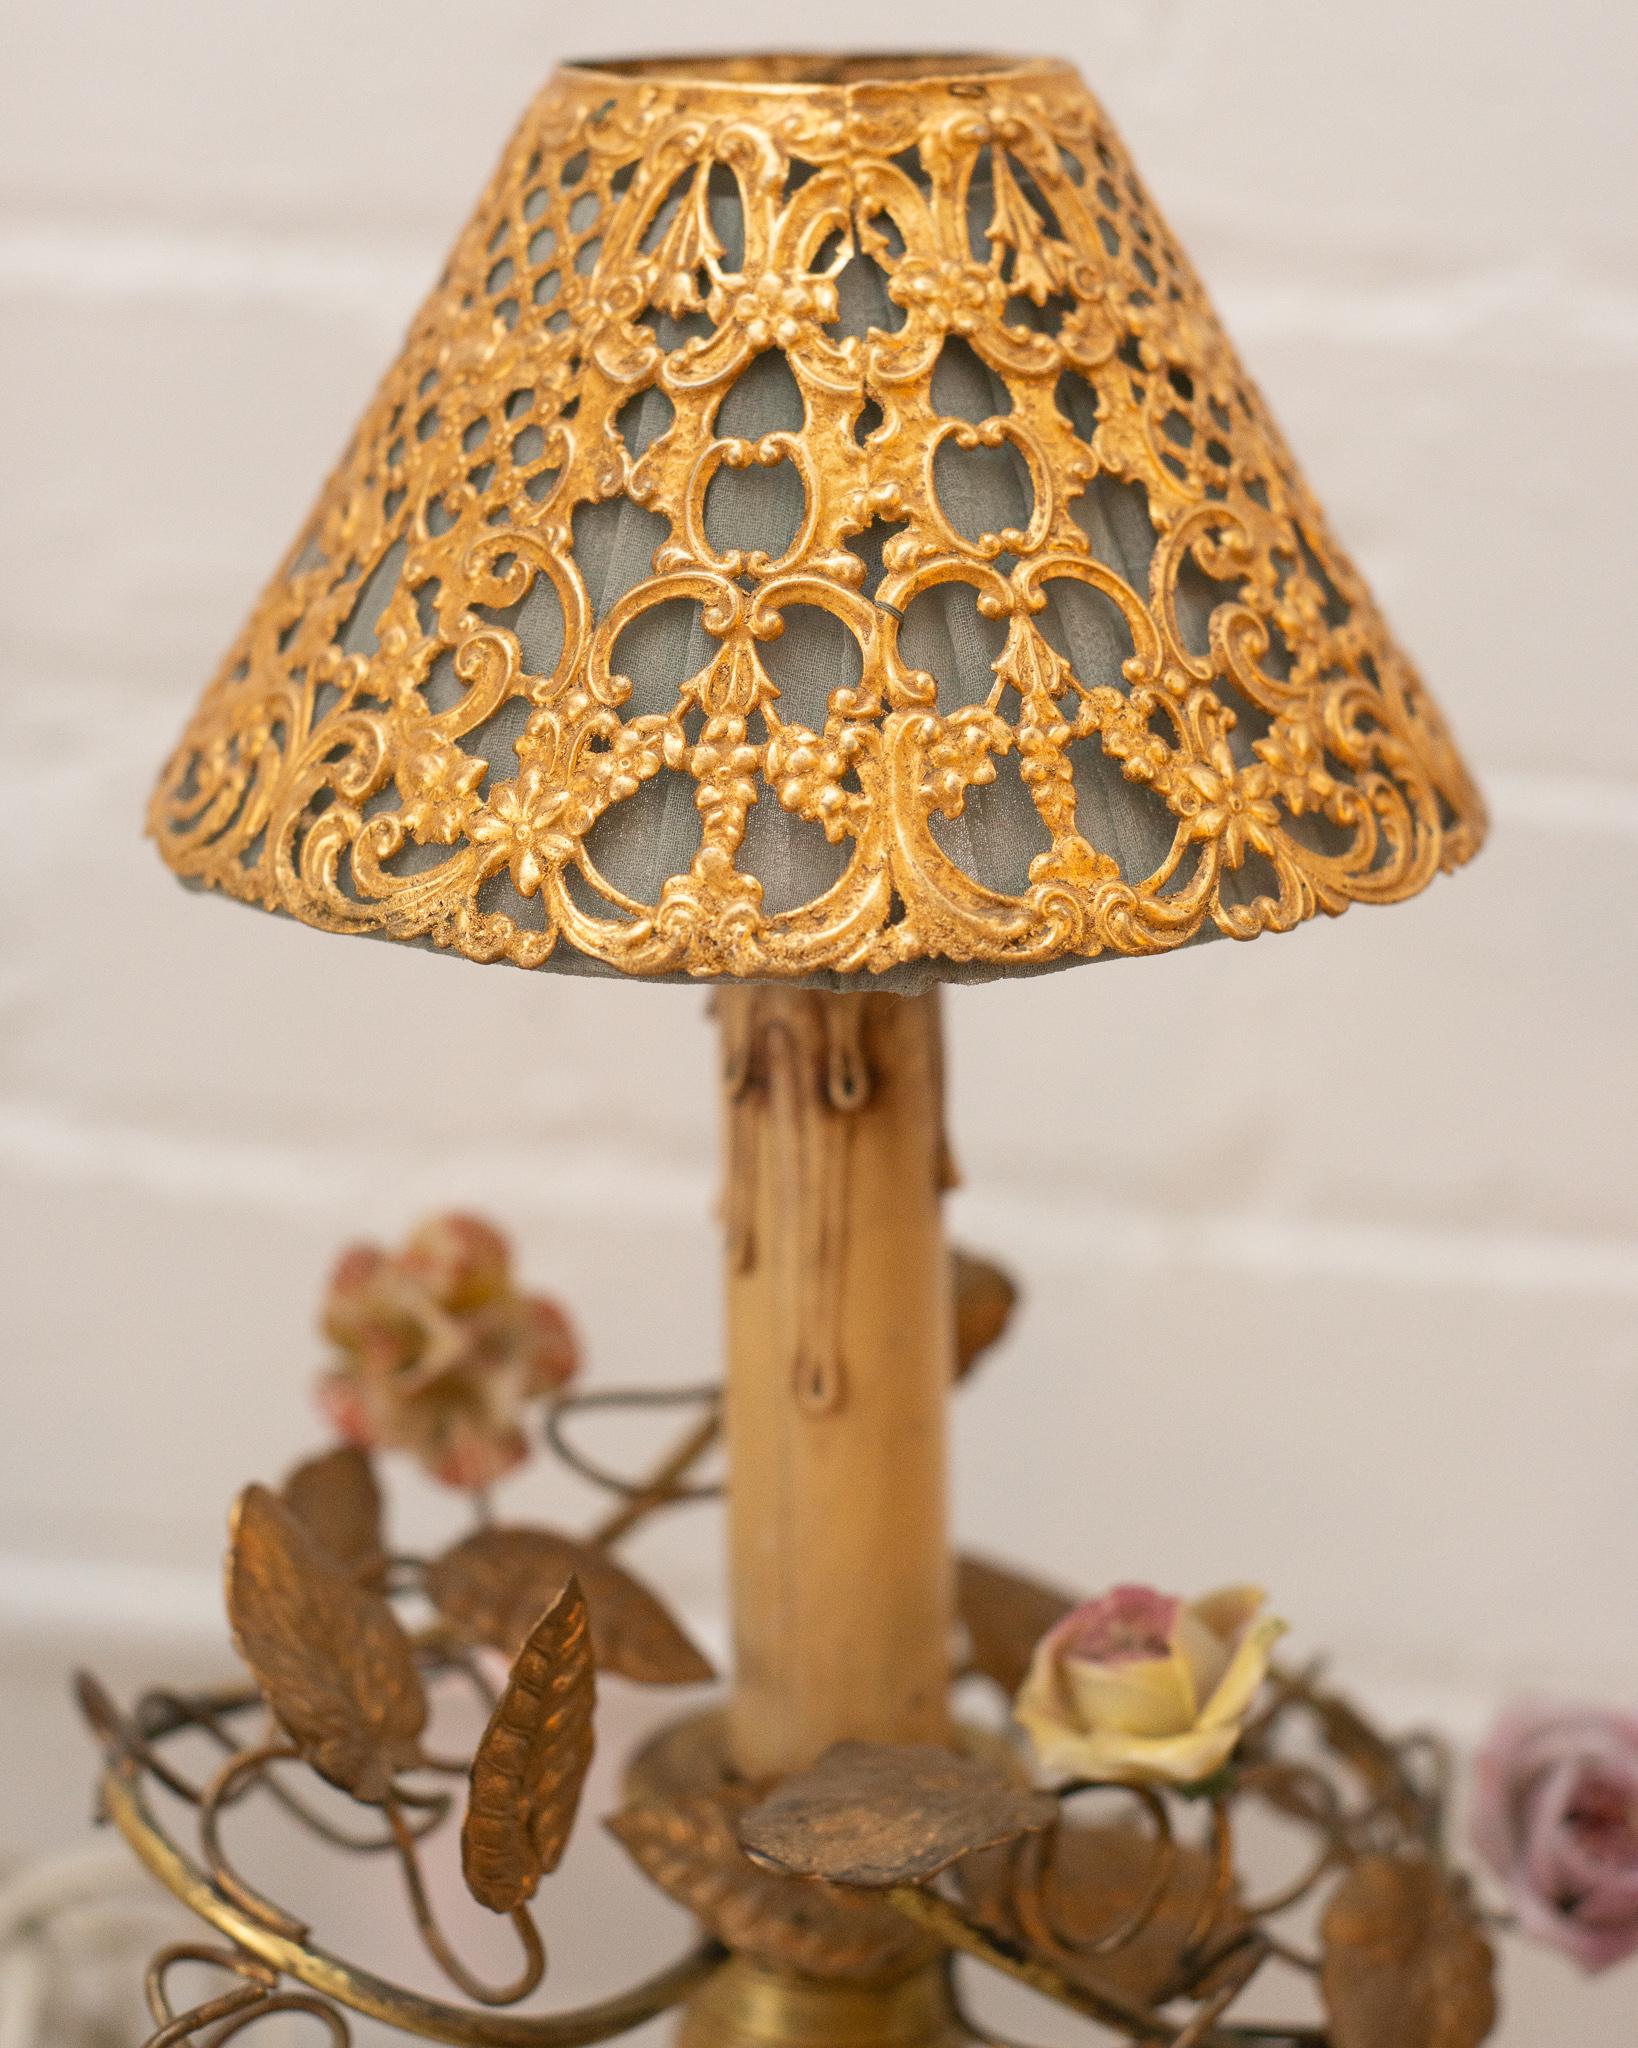 This stunning pair of small antique French bronze lamps with porcelain flowers feature unique silk and metal shades. Placed on a desk or side table, these delicate lamps add whimsy and complete an area.